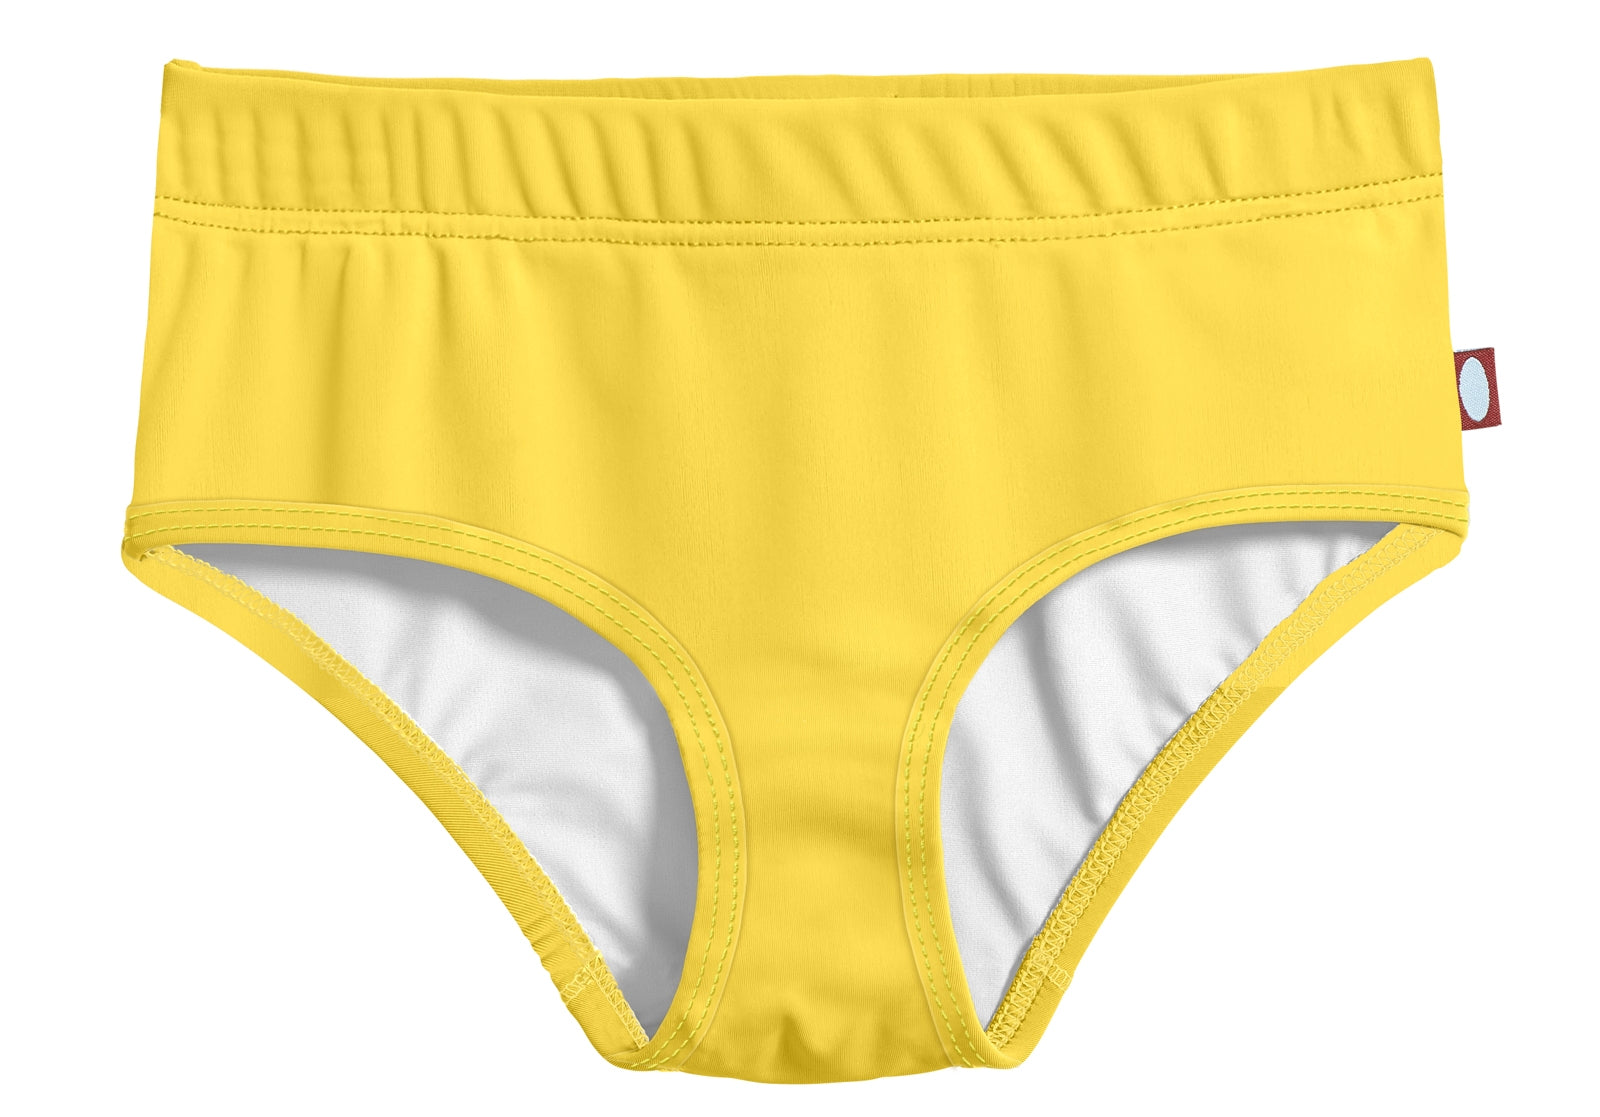 70% Off Women's Fruit of the Loom Panties + FREE Shipping for